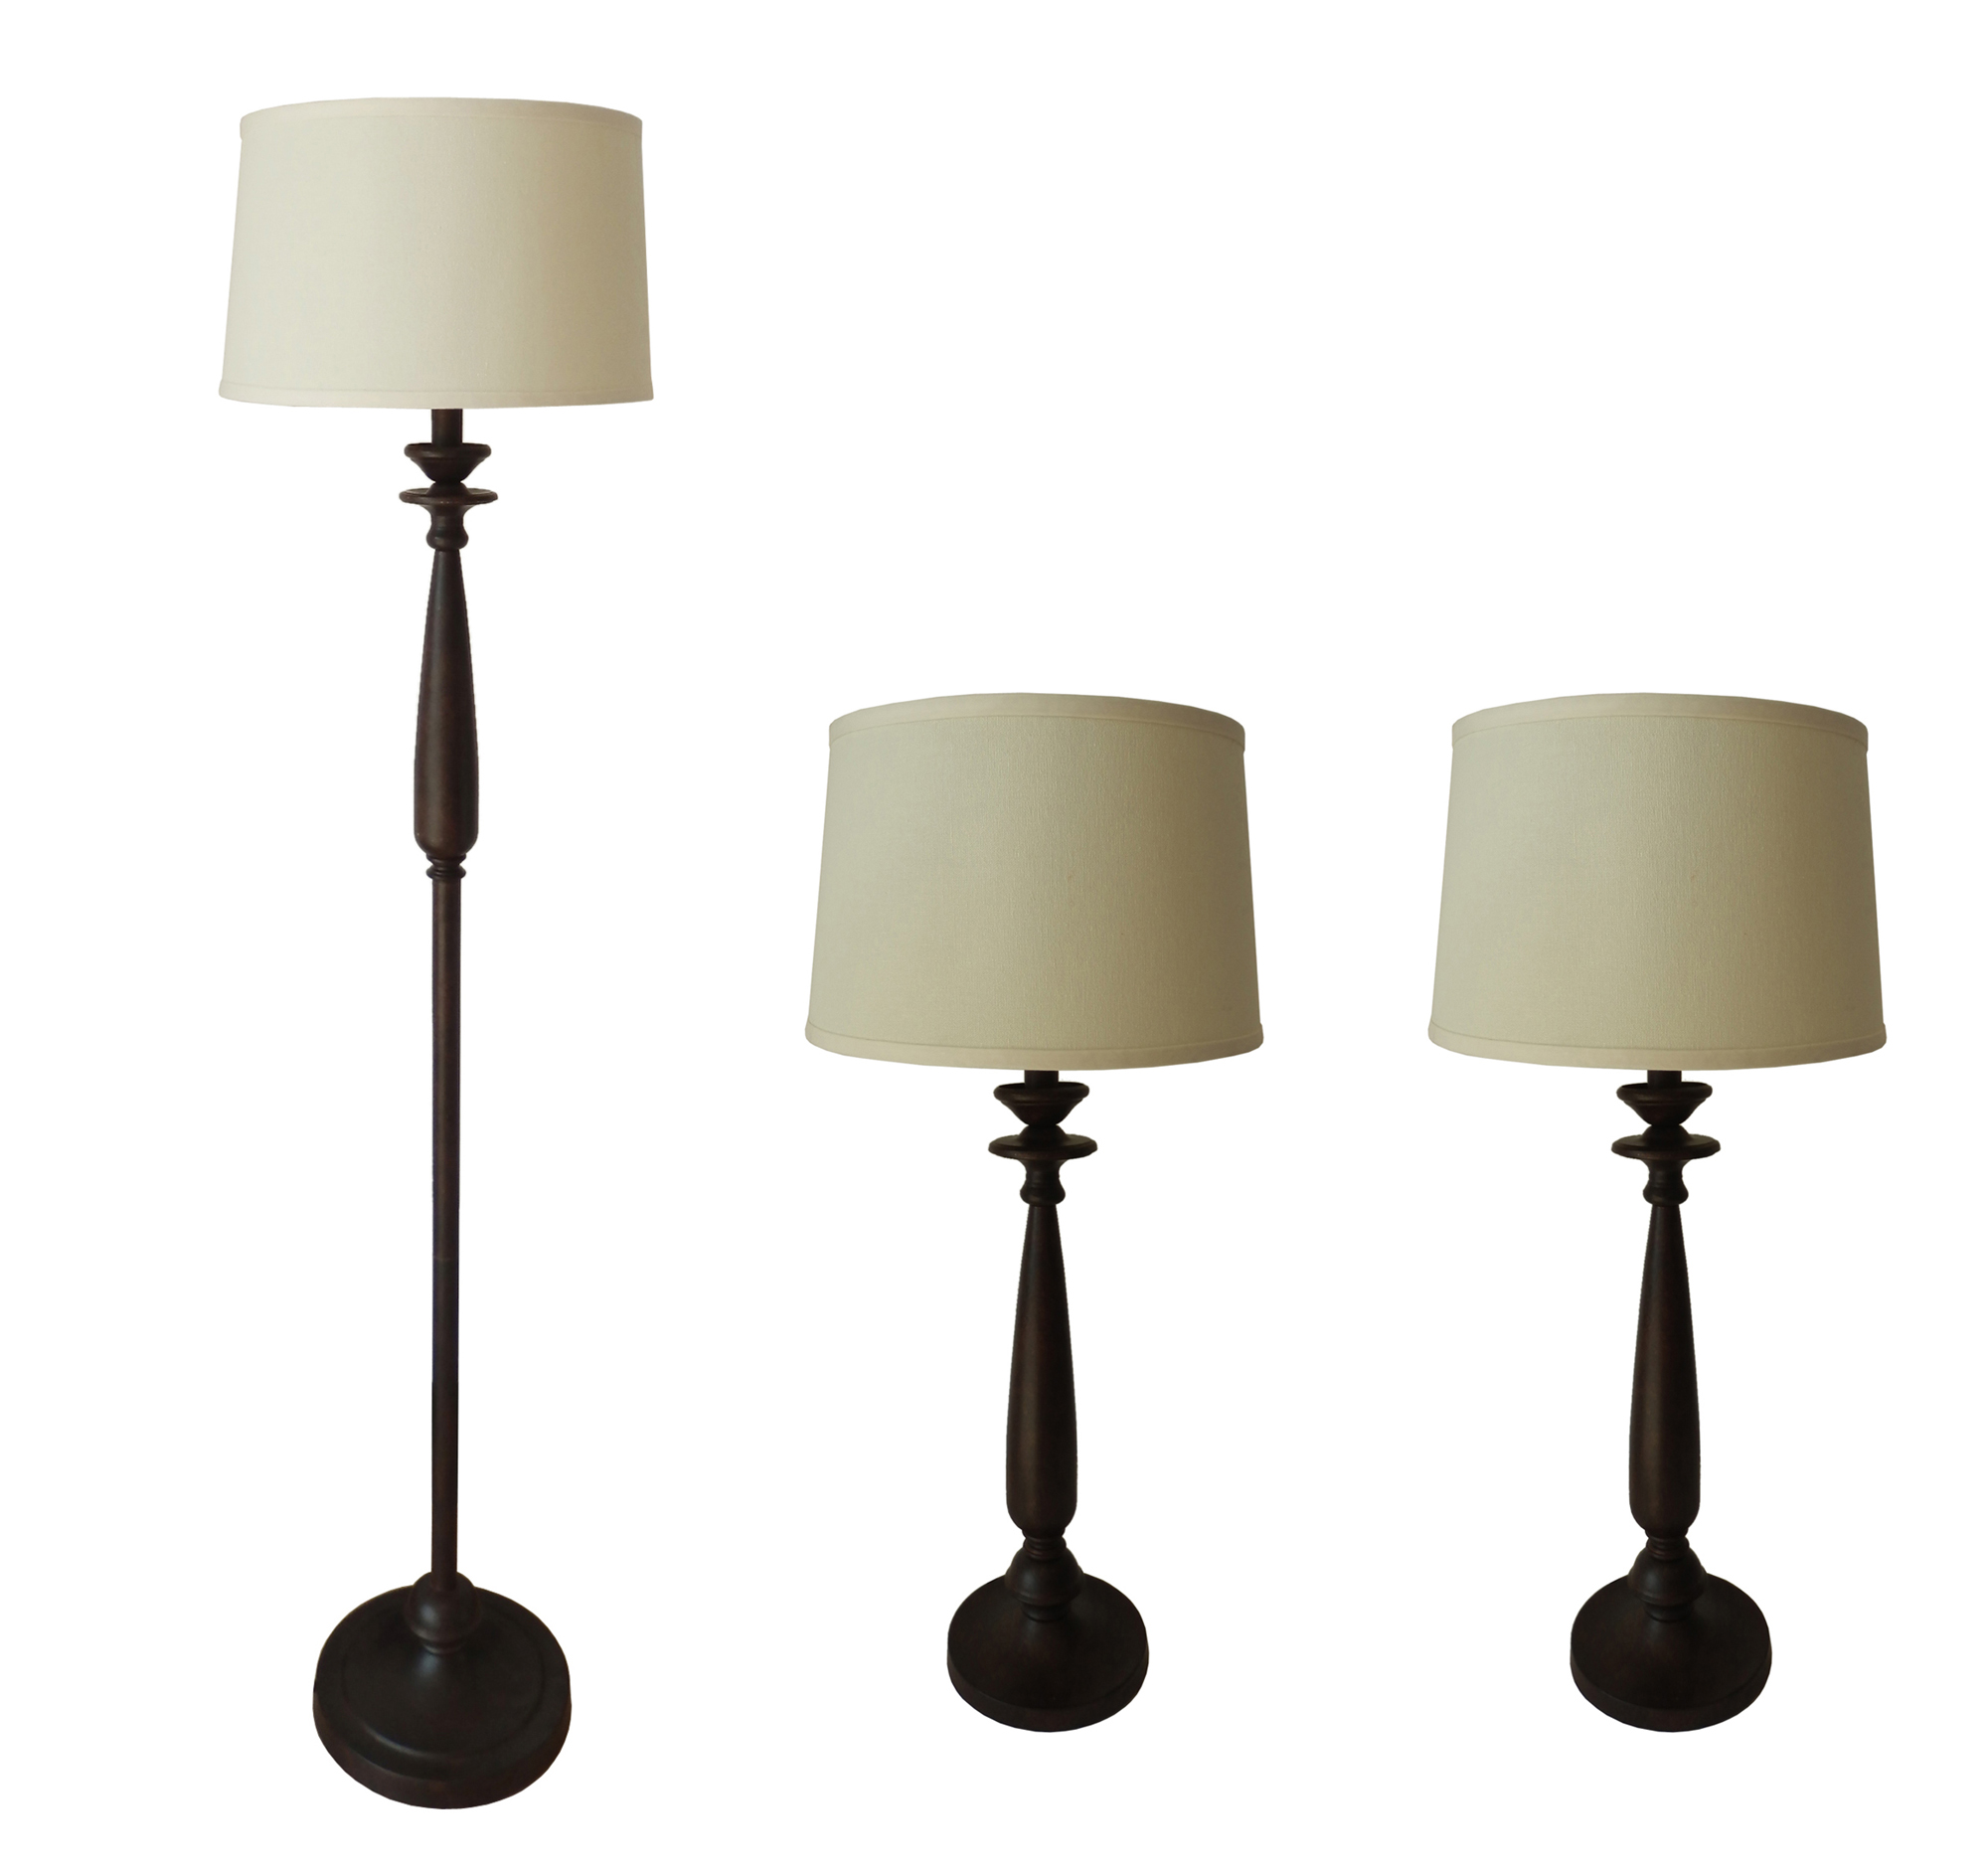 3 Piece Metal & Resin Lamp Set with Antique Brown Finish.